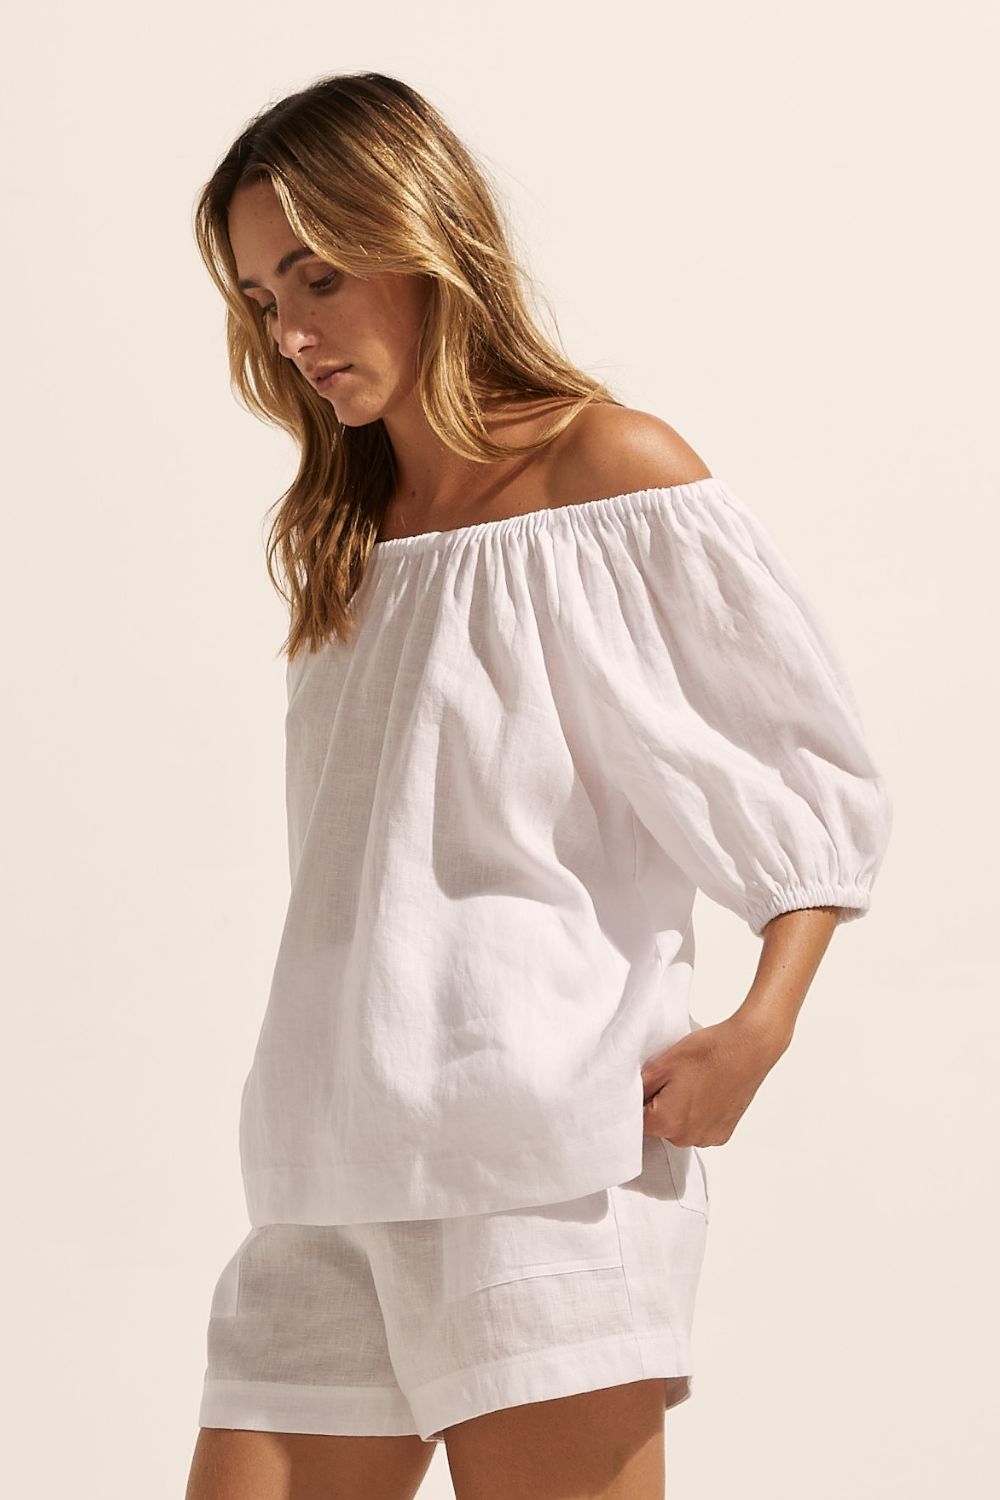 white, top, off-the-shoulder, mid-length sleeve, small side splits, elasticated sleeve cuff, tie at back, side image